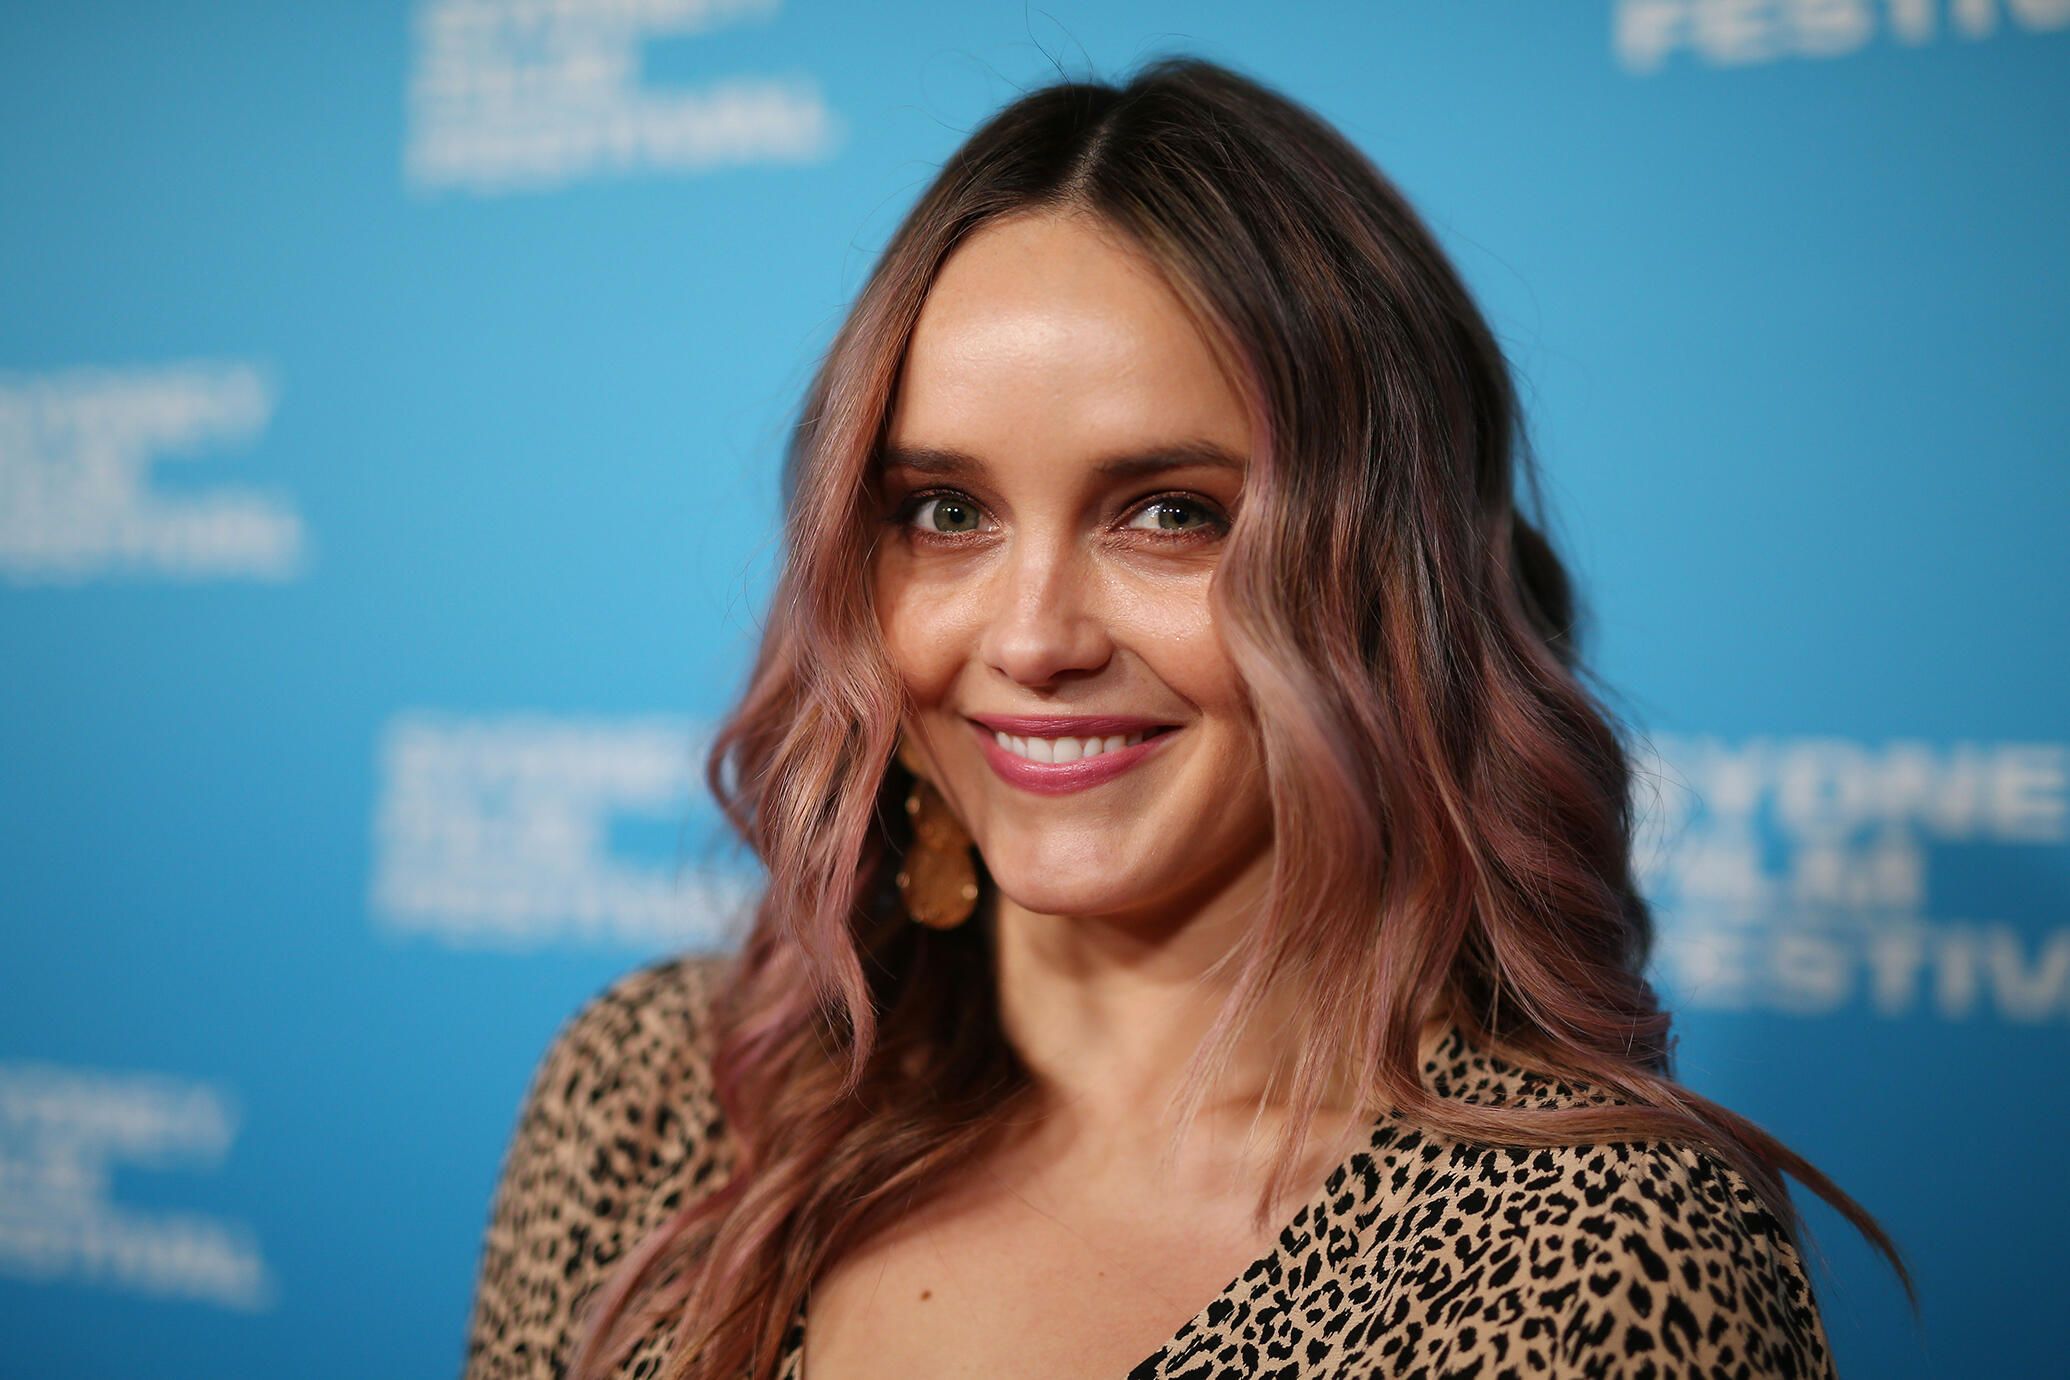 The Originals' Rebecca Breeds to Star in Silence of the Lambs